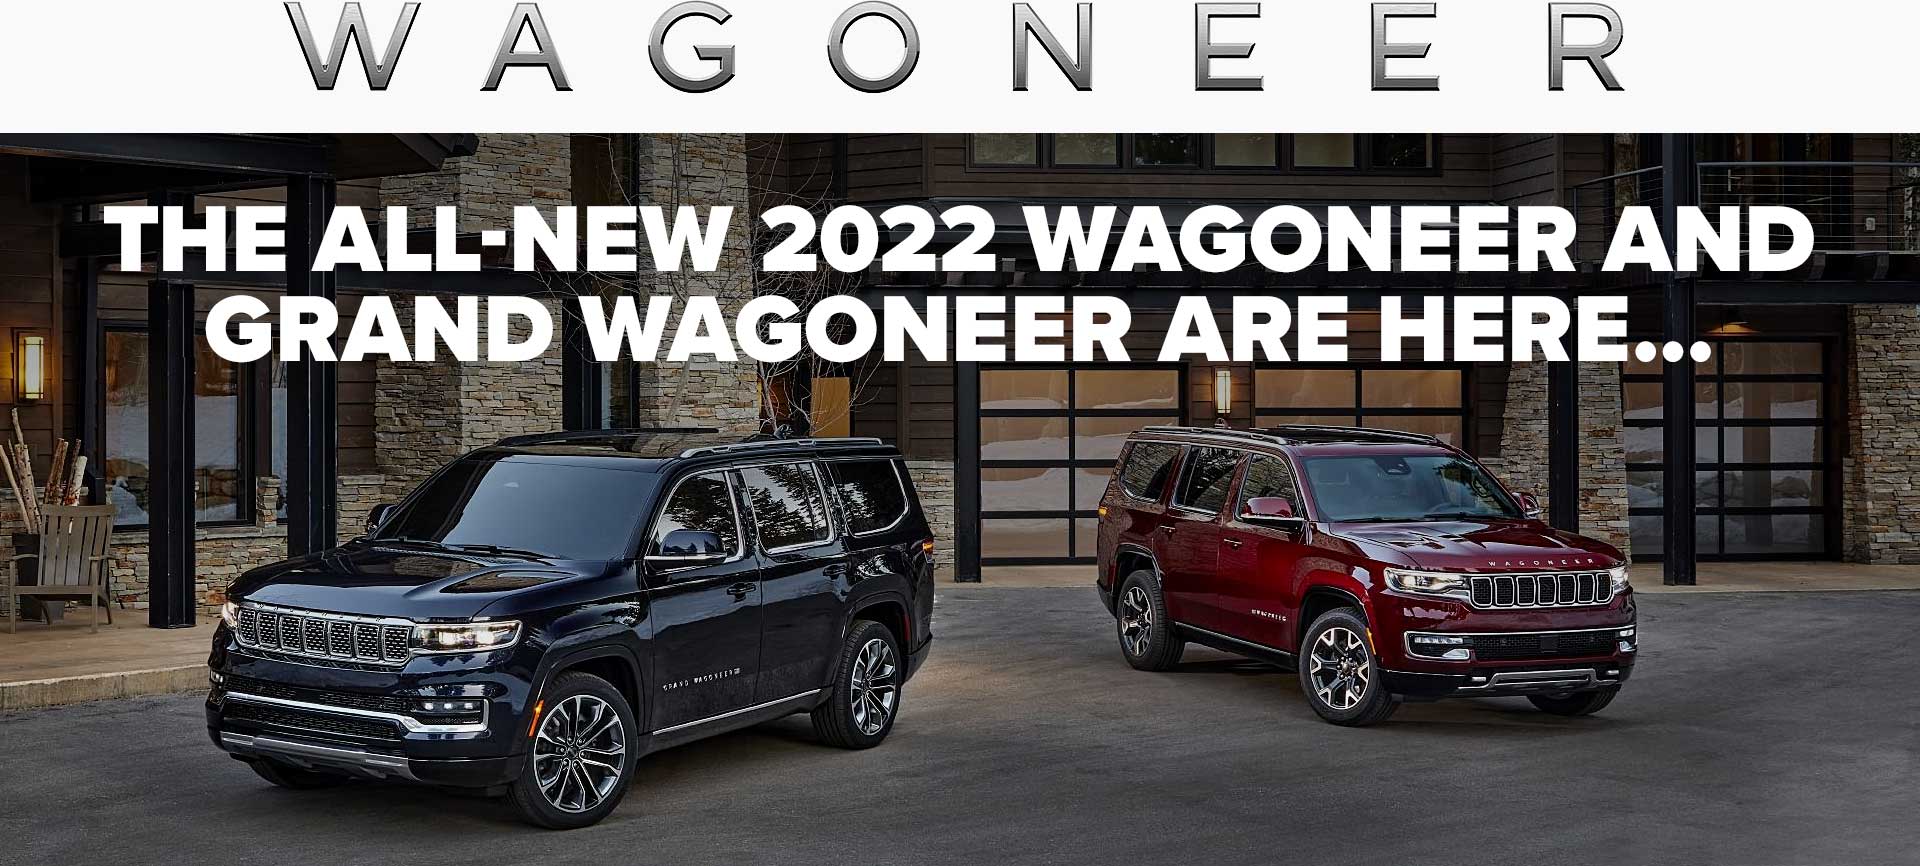 The All-New 2022 Wagoneer and Grand Wagoneer Are Here...